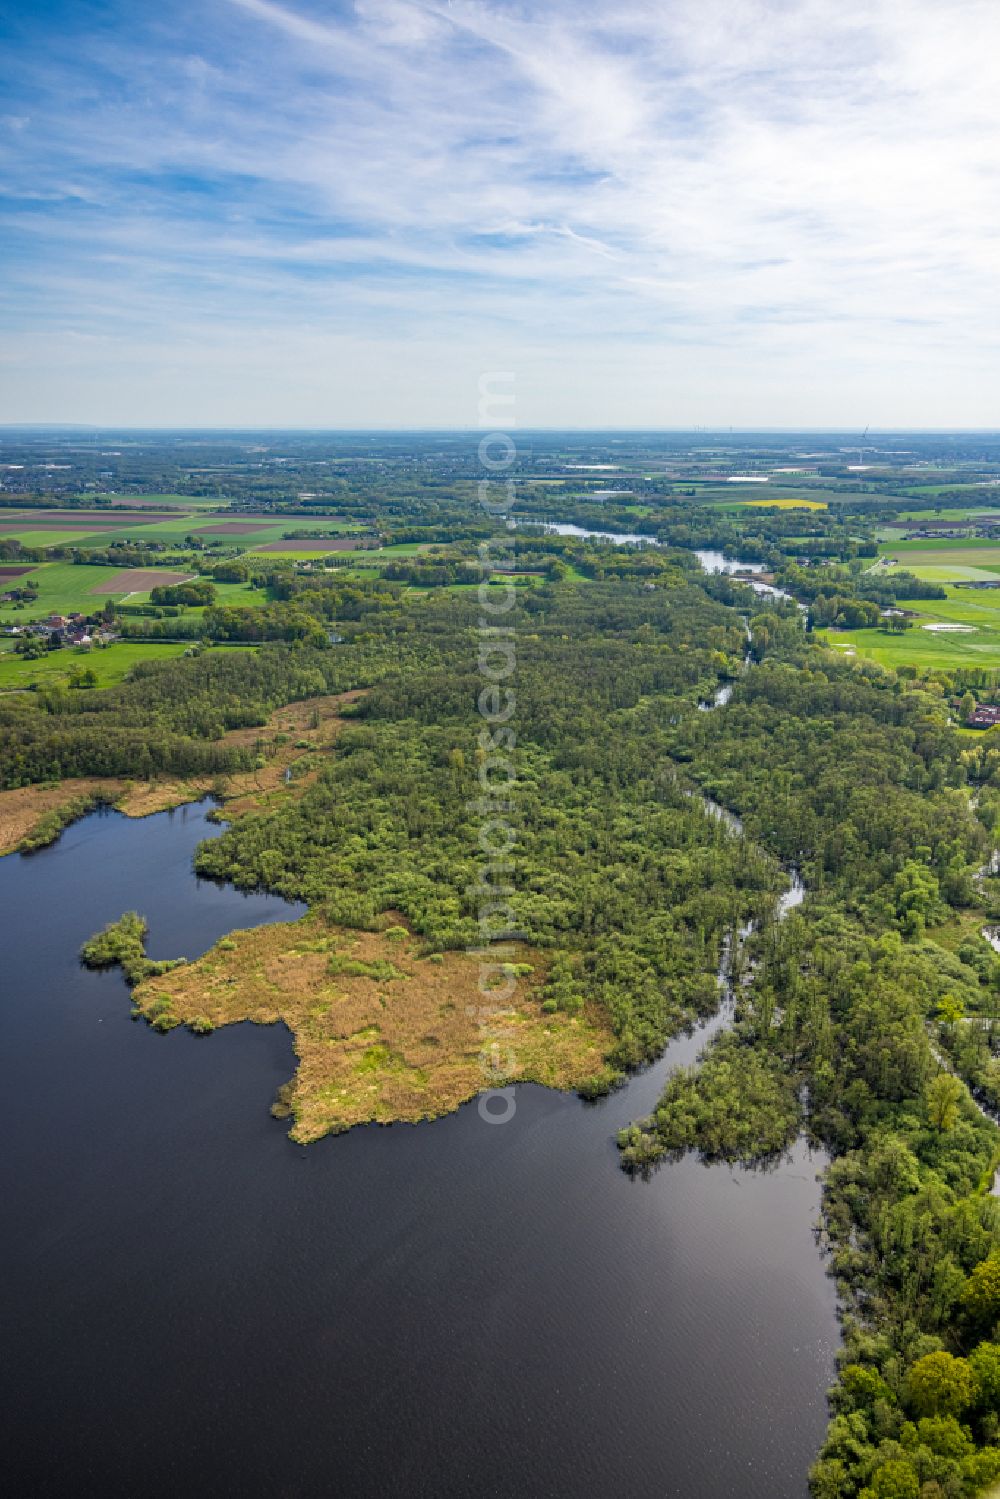 Aerial photograph Nettetal - Shoreline landscape in the area of the chain of lakes Grosser De Wittsee - Krickenbecker Seen on the road Am Wittsee in Nettetal in the federal state of North Rhine-Westphalia, Germany